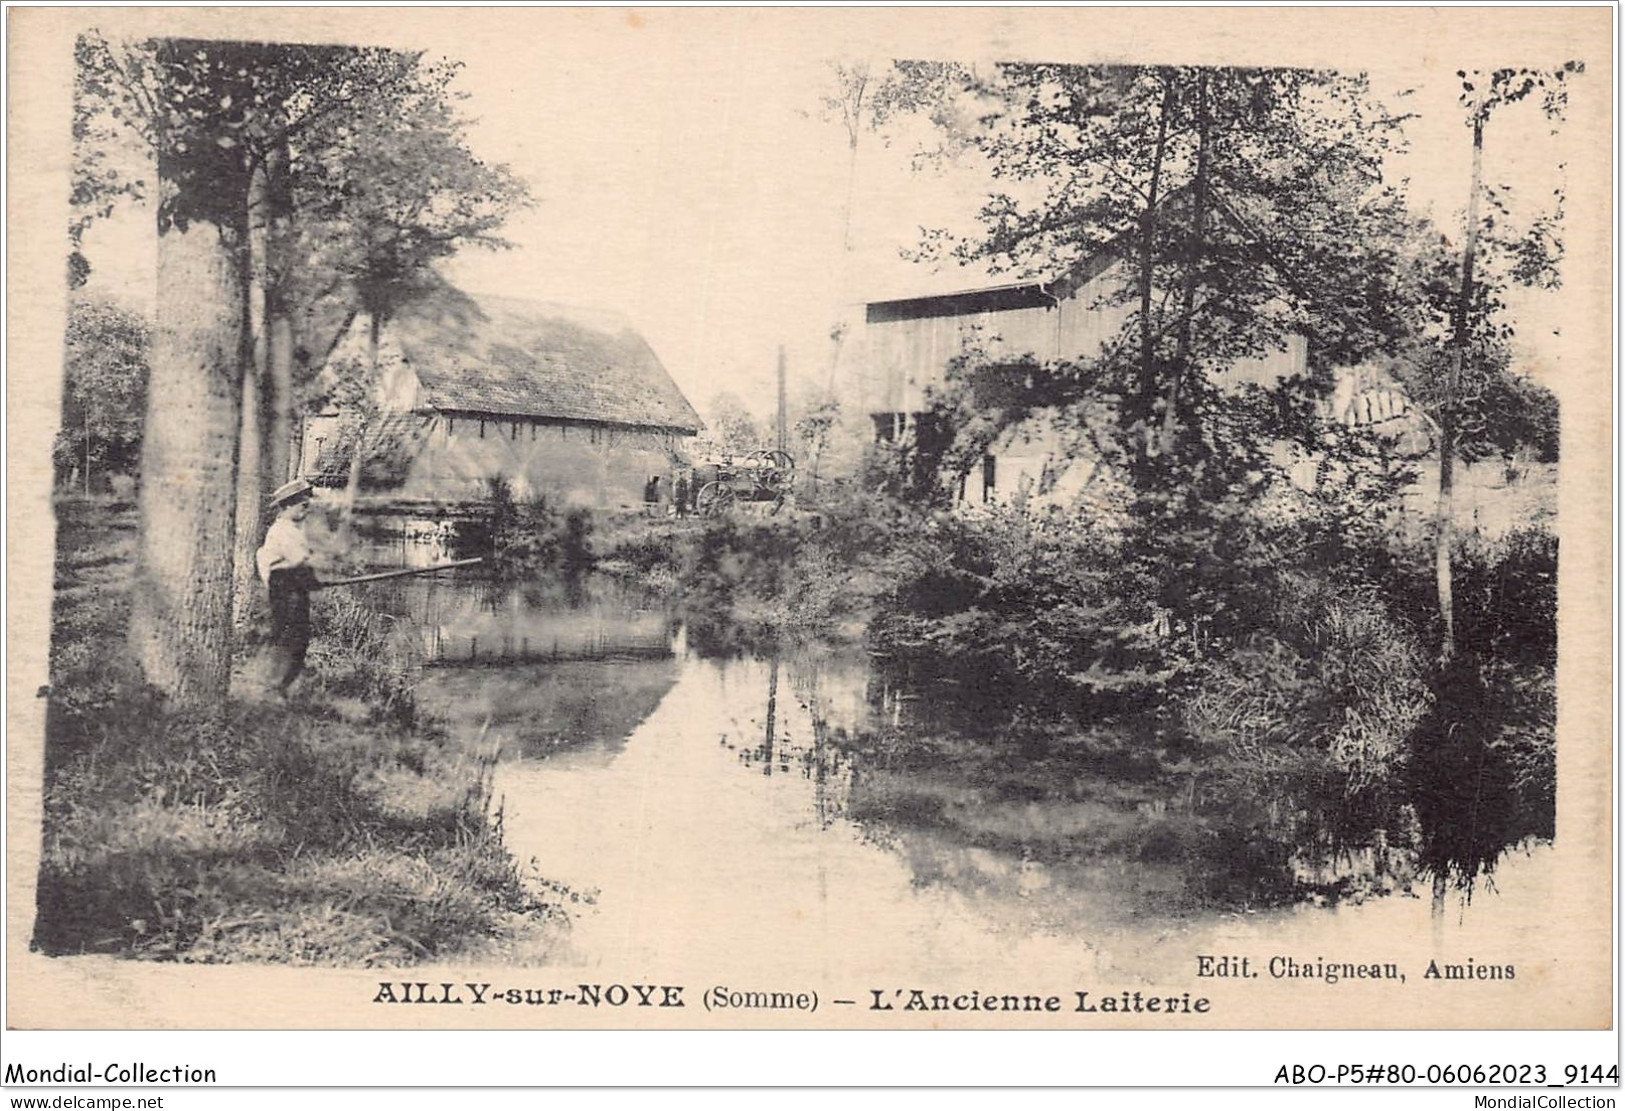 ABOP5-80-0397 - AILLY-SUR-NOYE - L'Ancienne Laiterie - Ailly Sur Noye